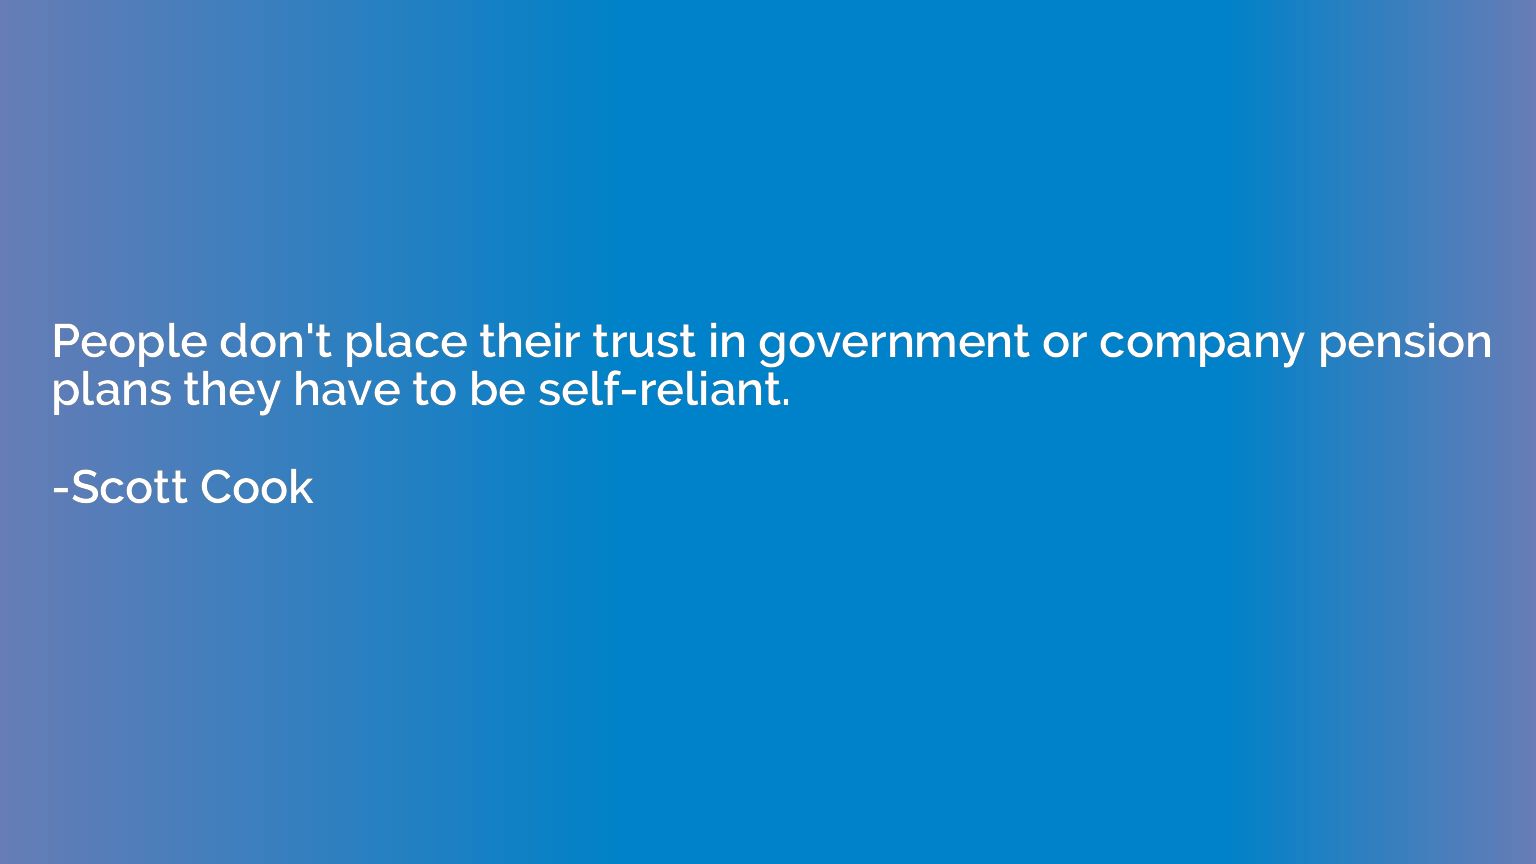 People don't place their trust in government or company pens